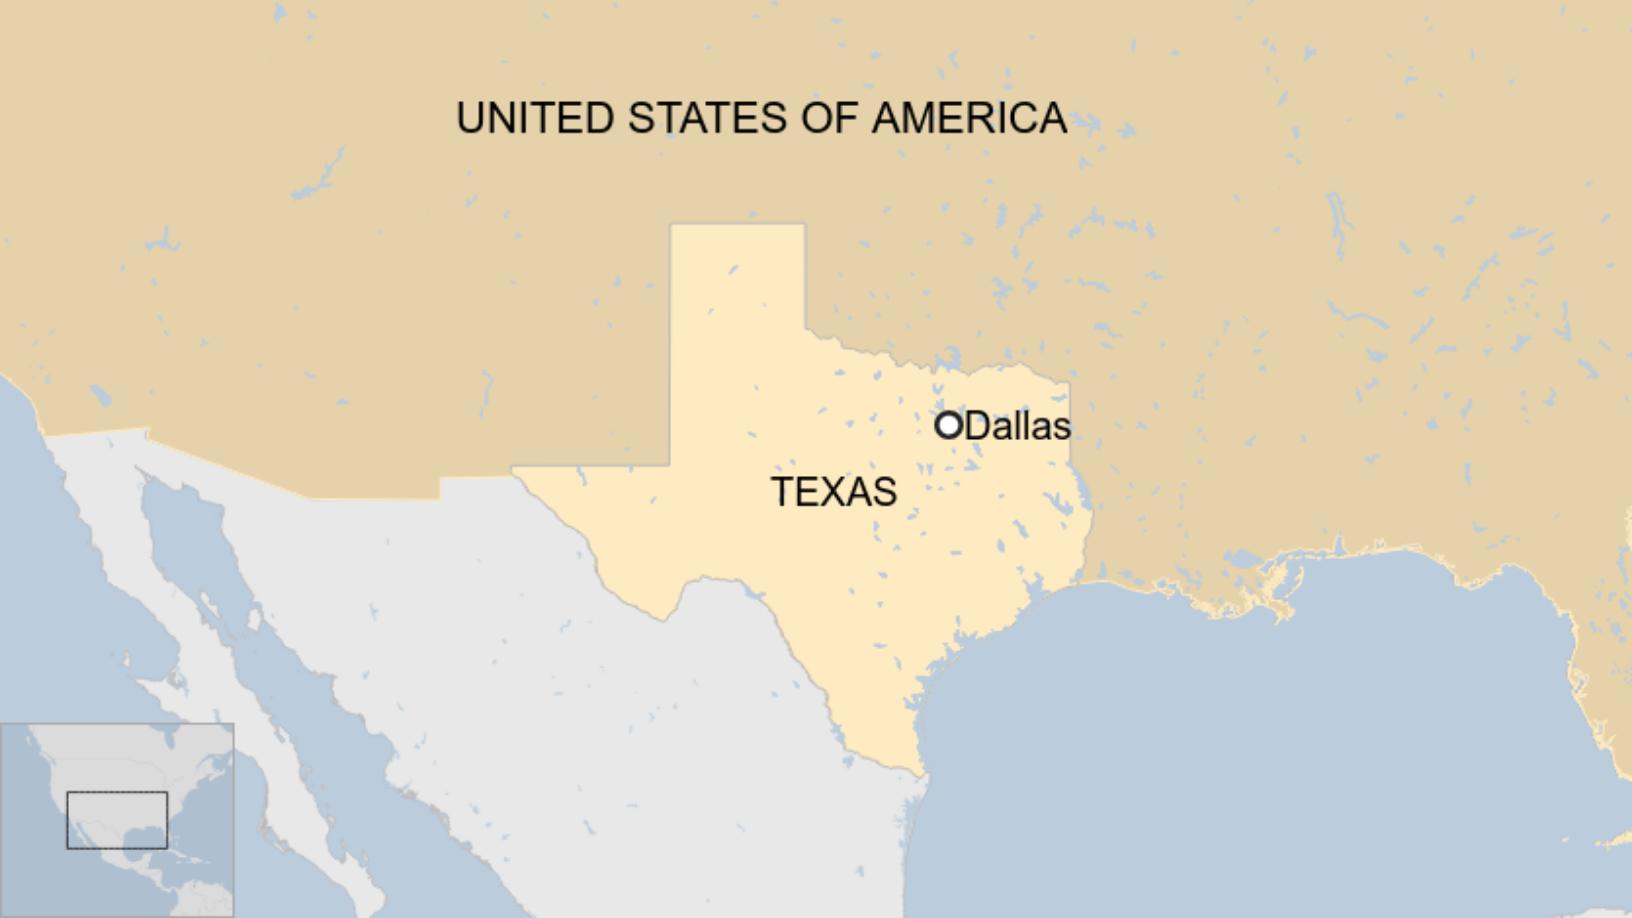 Map: Map showing US state of Texas and city of Dallas